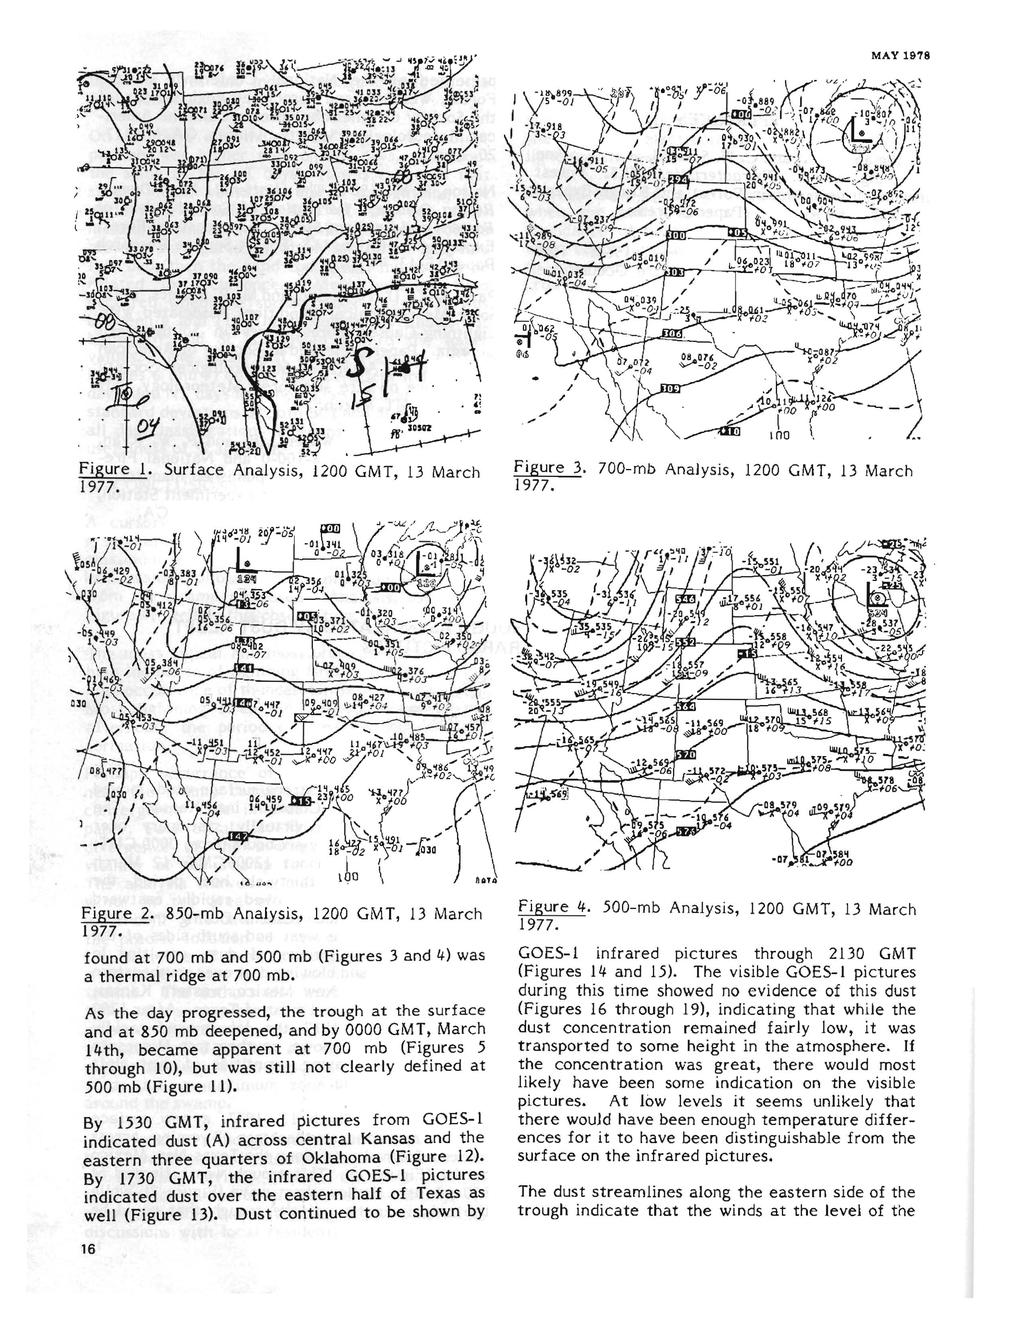 MAY 1978 Figure 1. Figure 3. 700-mb Analysis, 1200 GMT, 13 March Figure 2. 850-mb Analysis, 1200 GMT, 13 March found at 700 mb and 500 mb (Figures 3 and 4) was a thermal ridge at 700 mb.